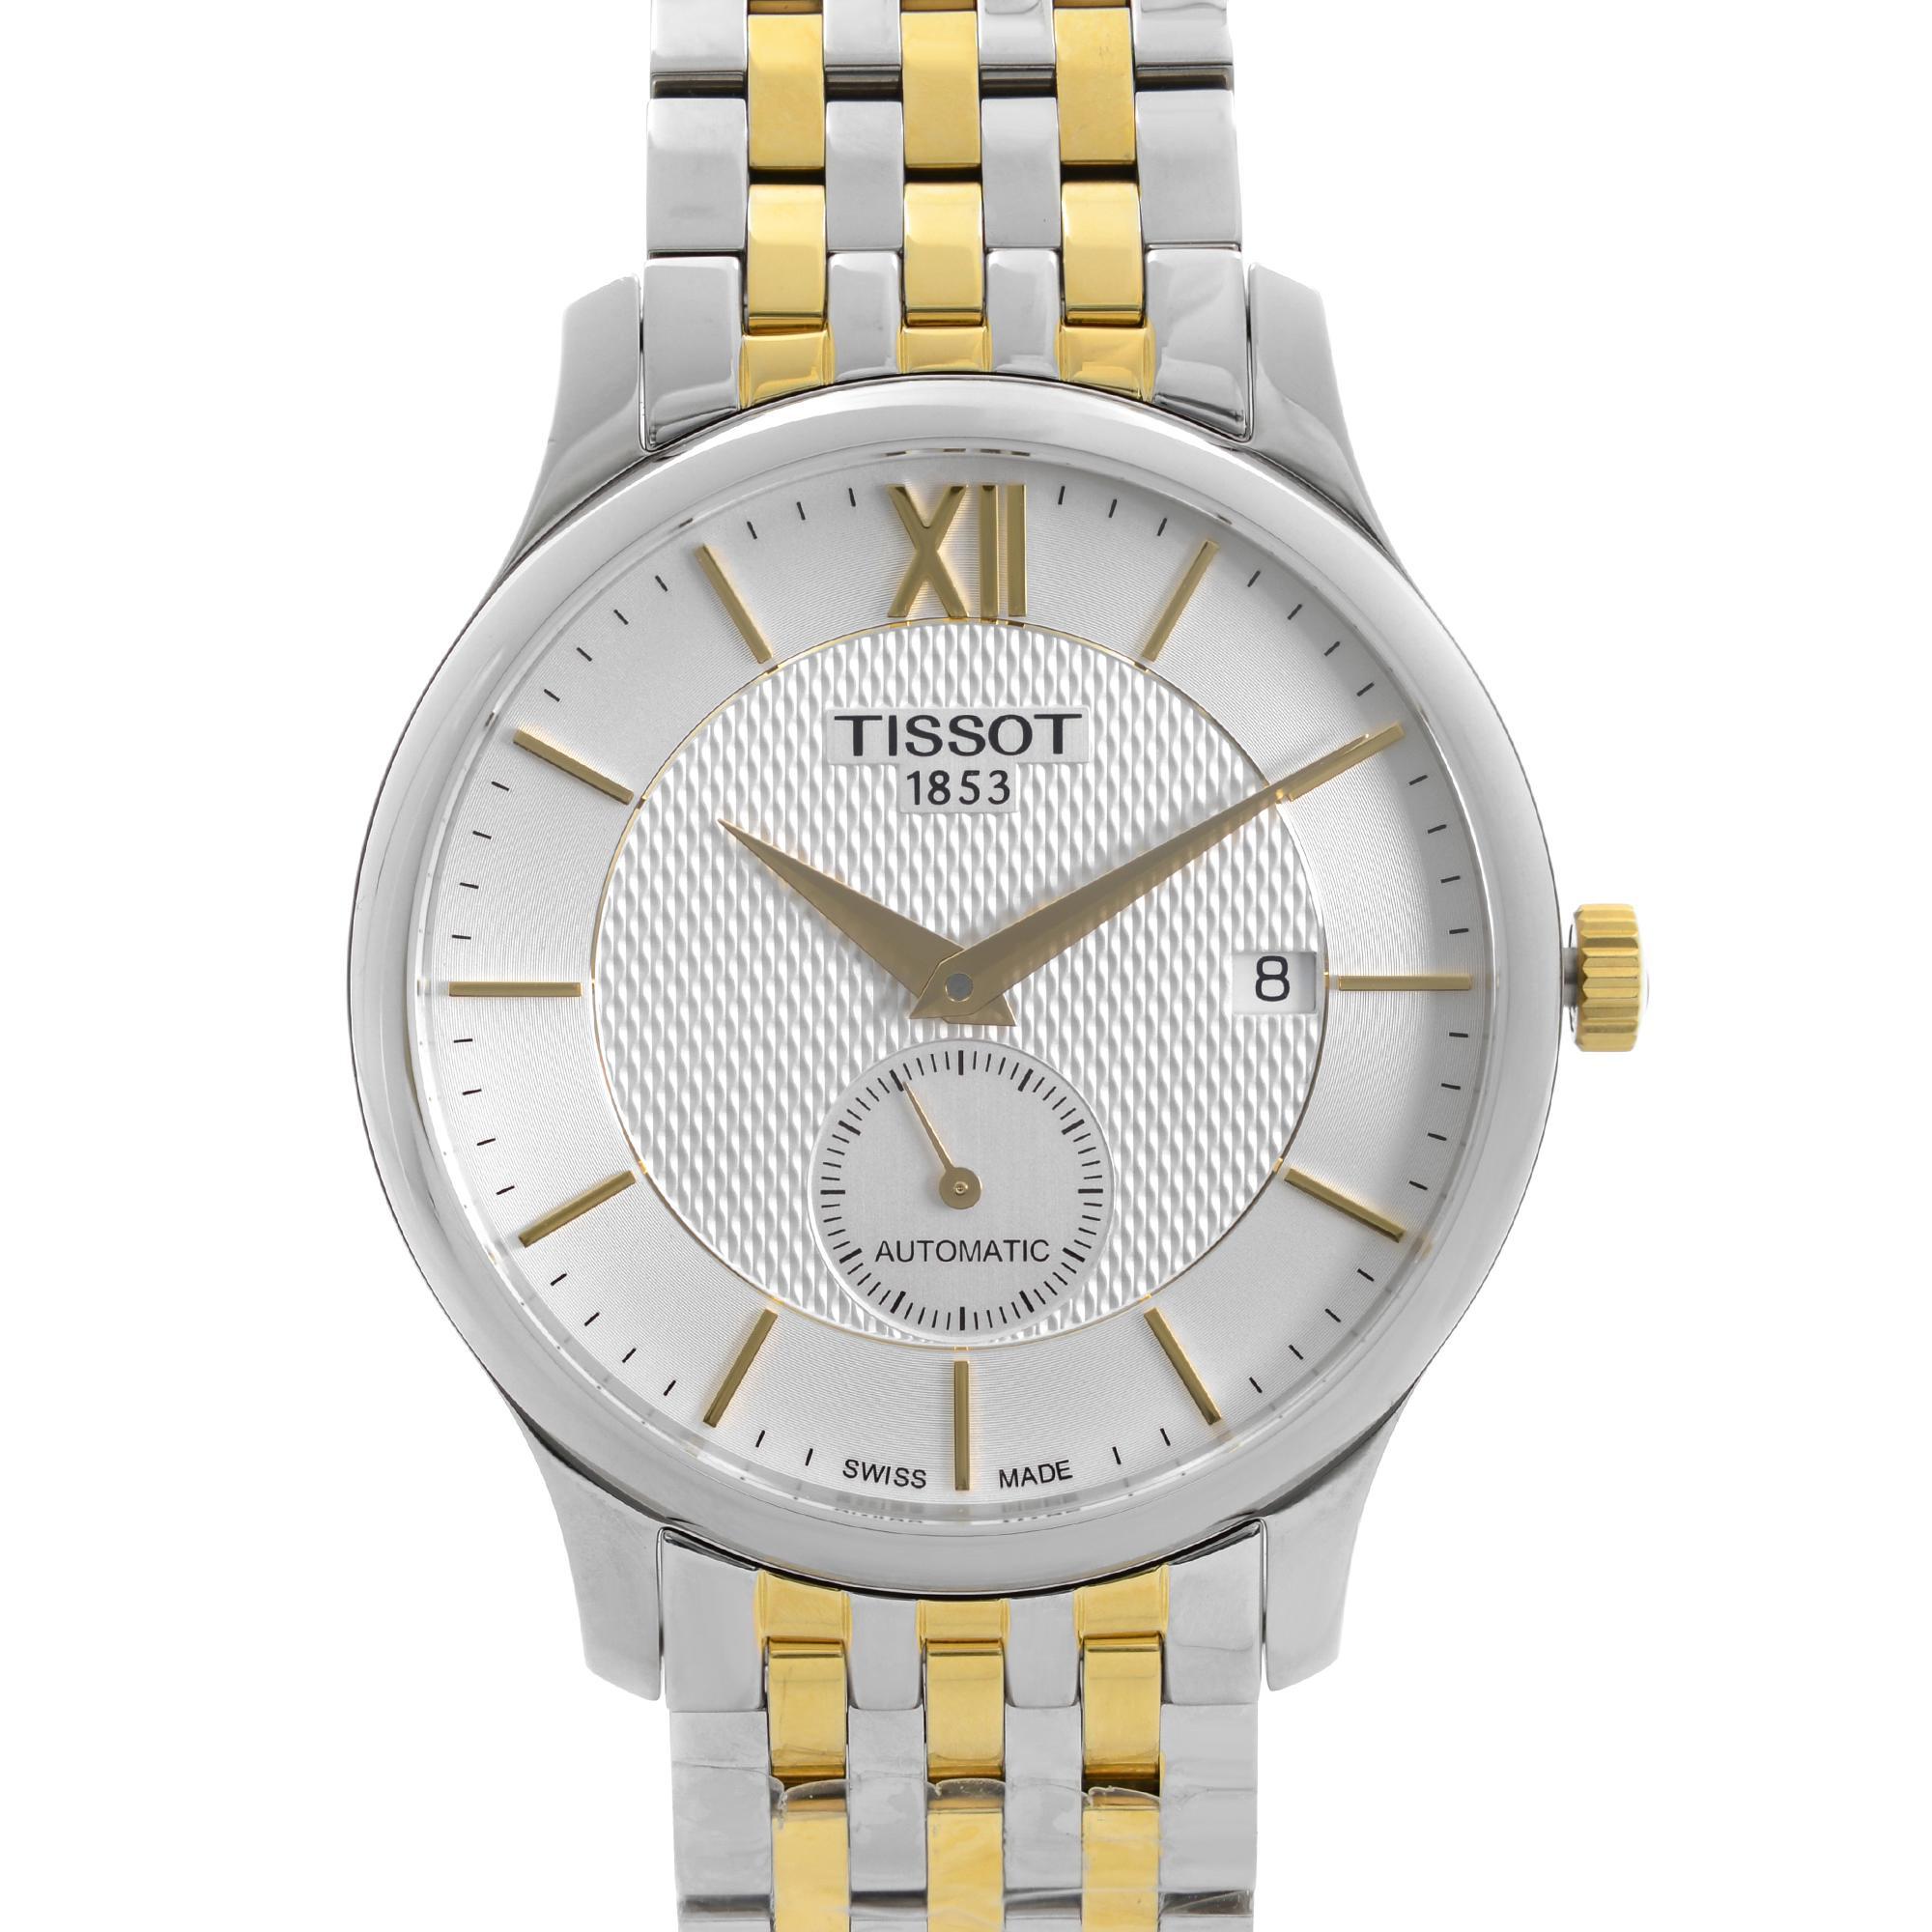 Display Model Tissot T-Classic Tradition 40mm Stainless Steel Silver Dial Mens Automatic Watch T063.428.22.038.00. This Timepiece is Powered by Mechanical (Automatic) Movement and Features: Stainless Steel Case with a Two-Tone Stainless Steel